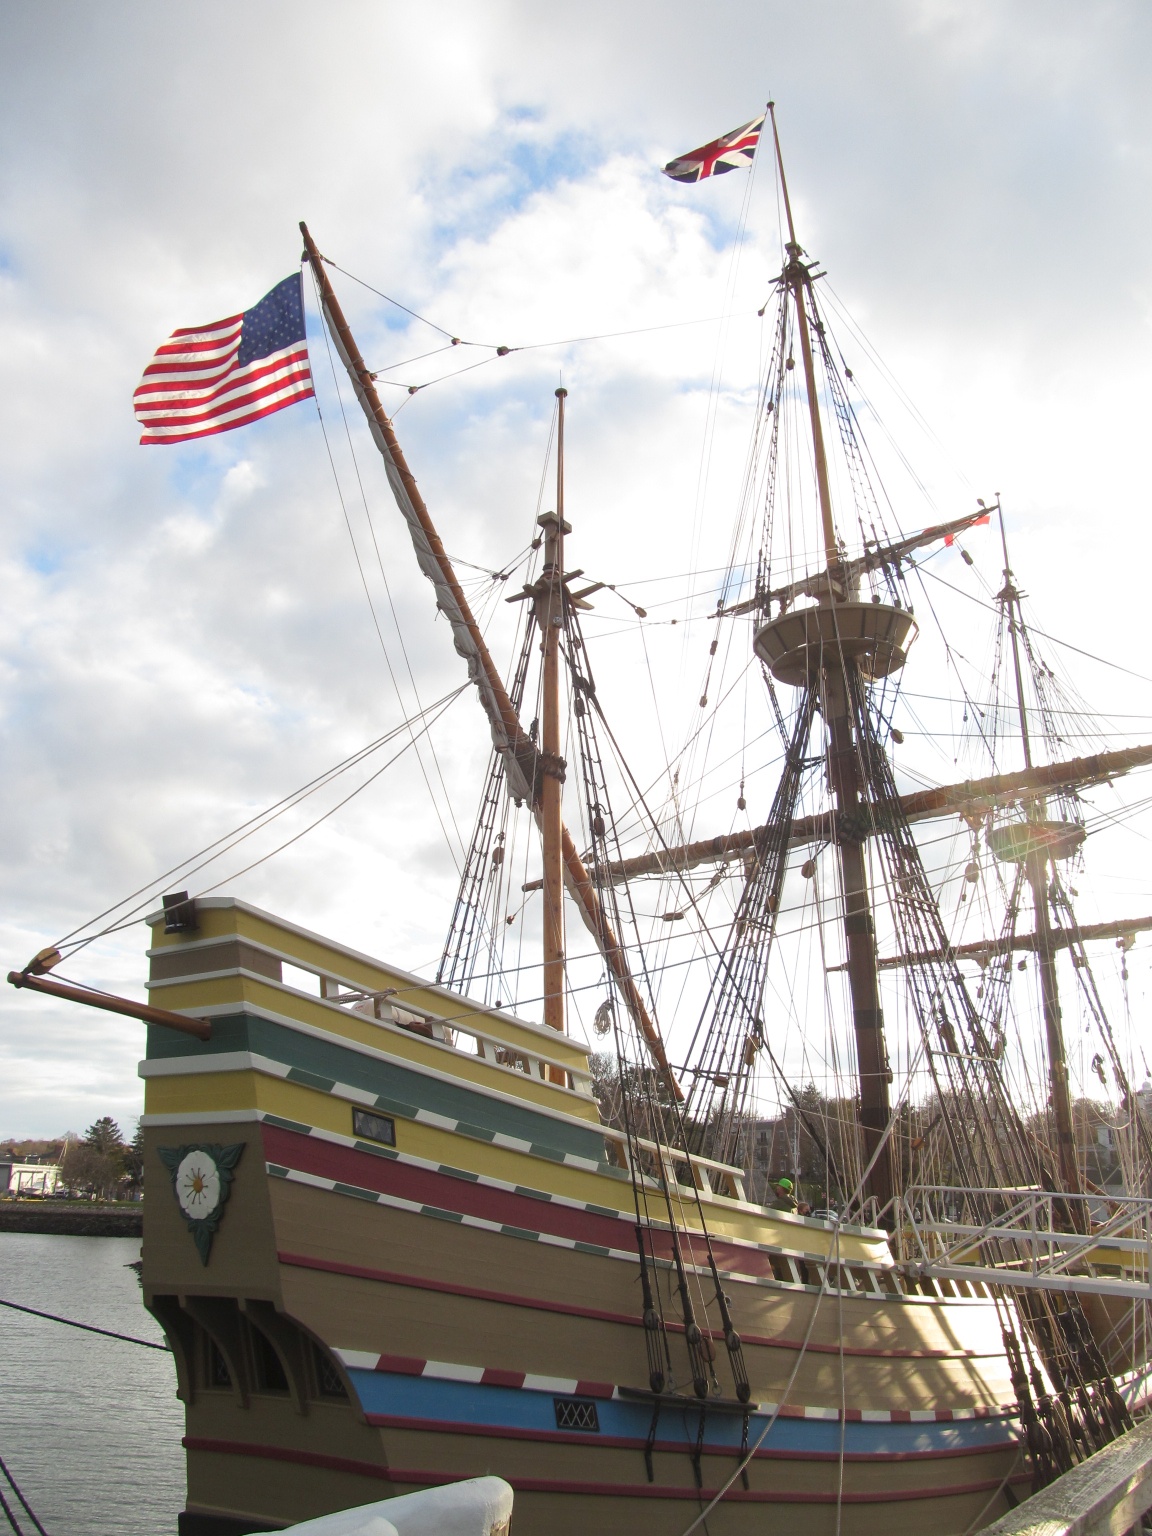 Mayflower II in Plymouth Harbor, following its recent restoration. Photo Copyright 2020 Michael D. Bates. All rights reserved.